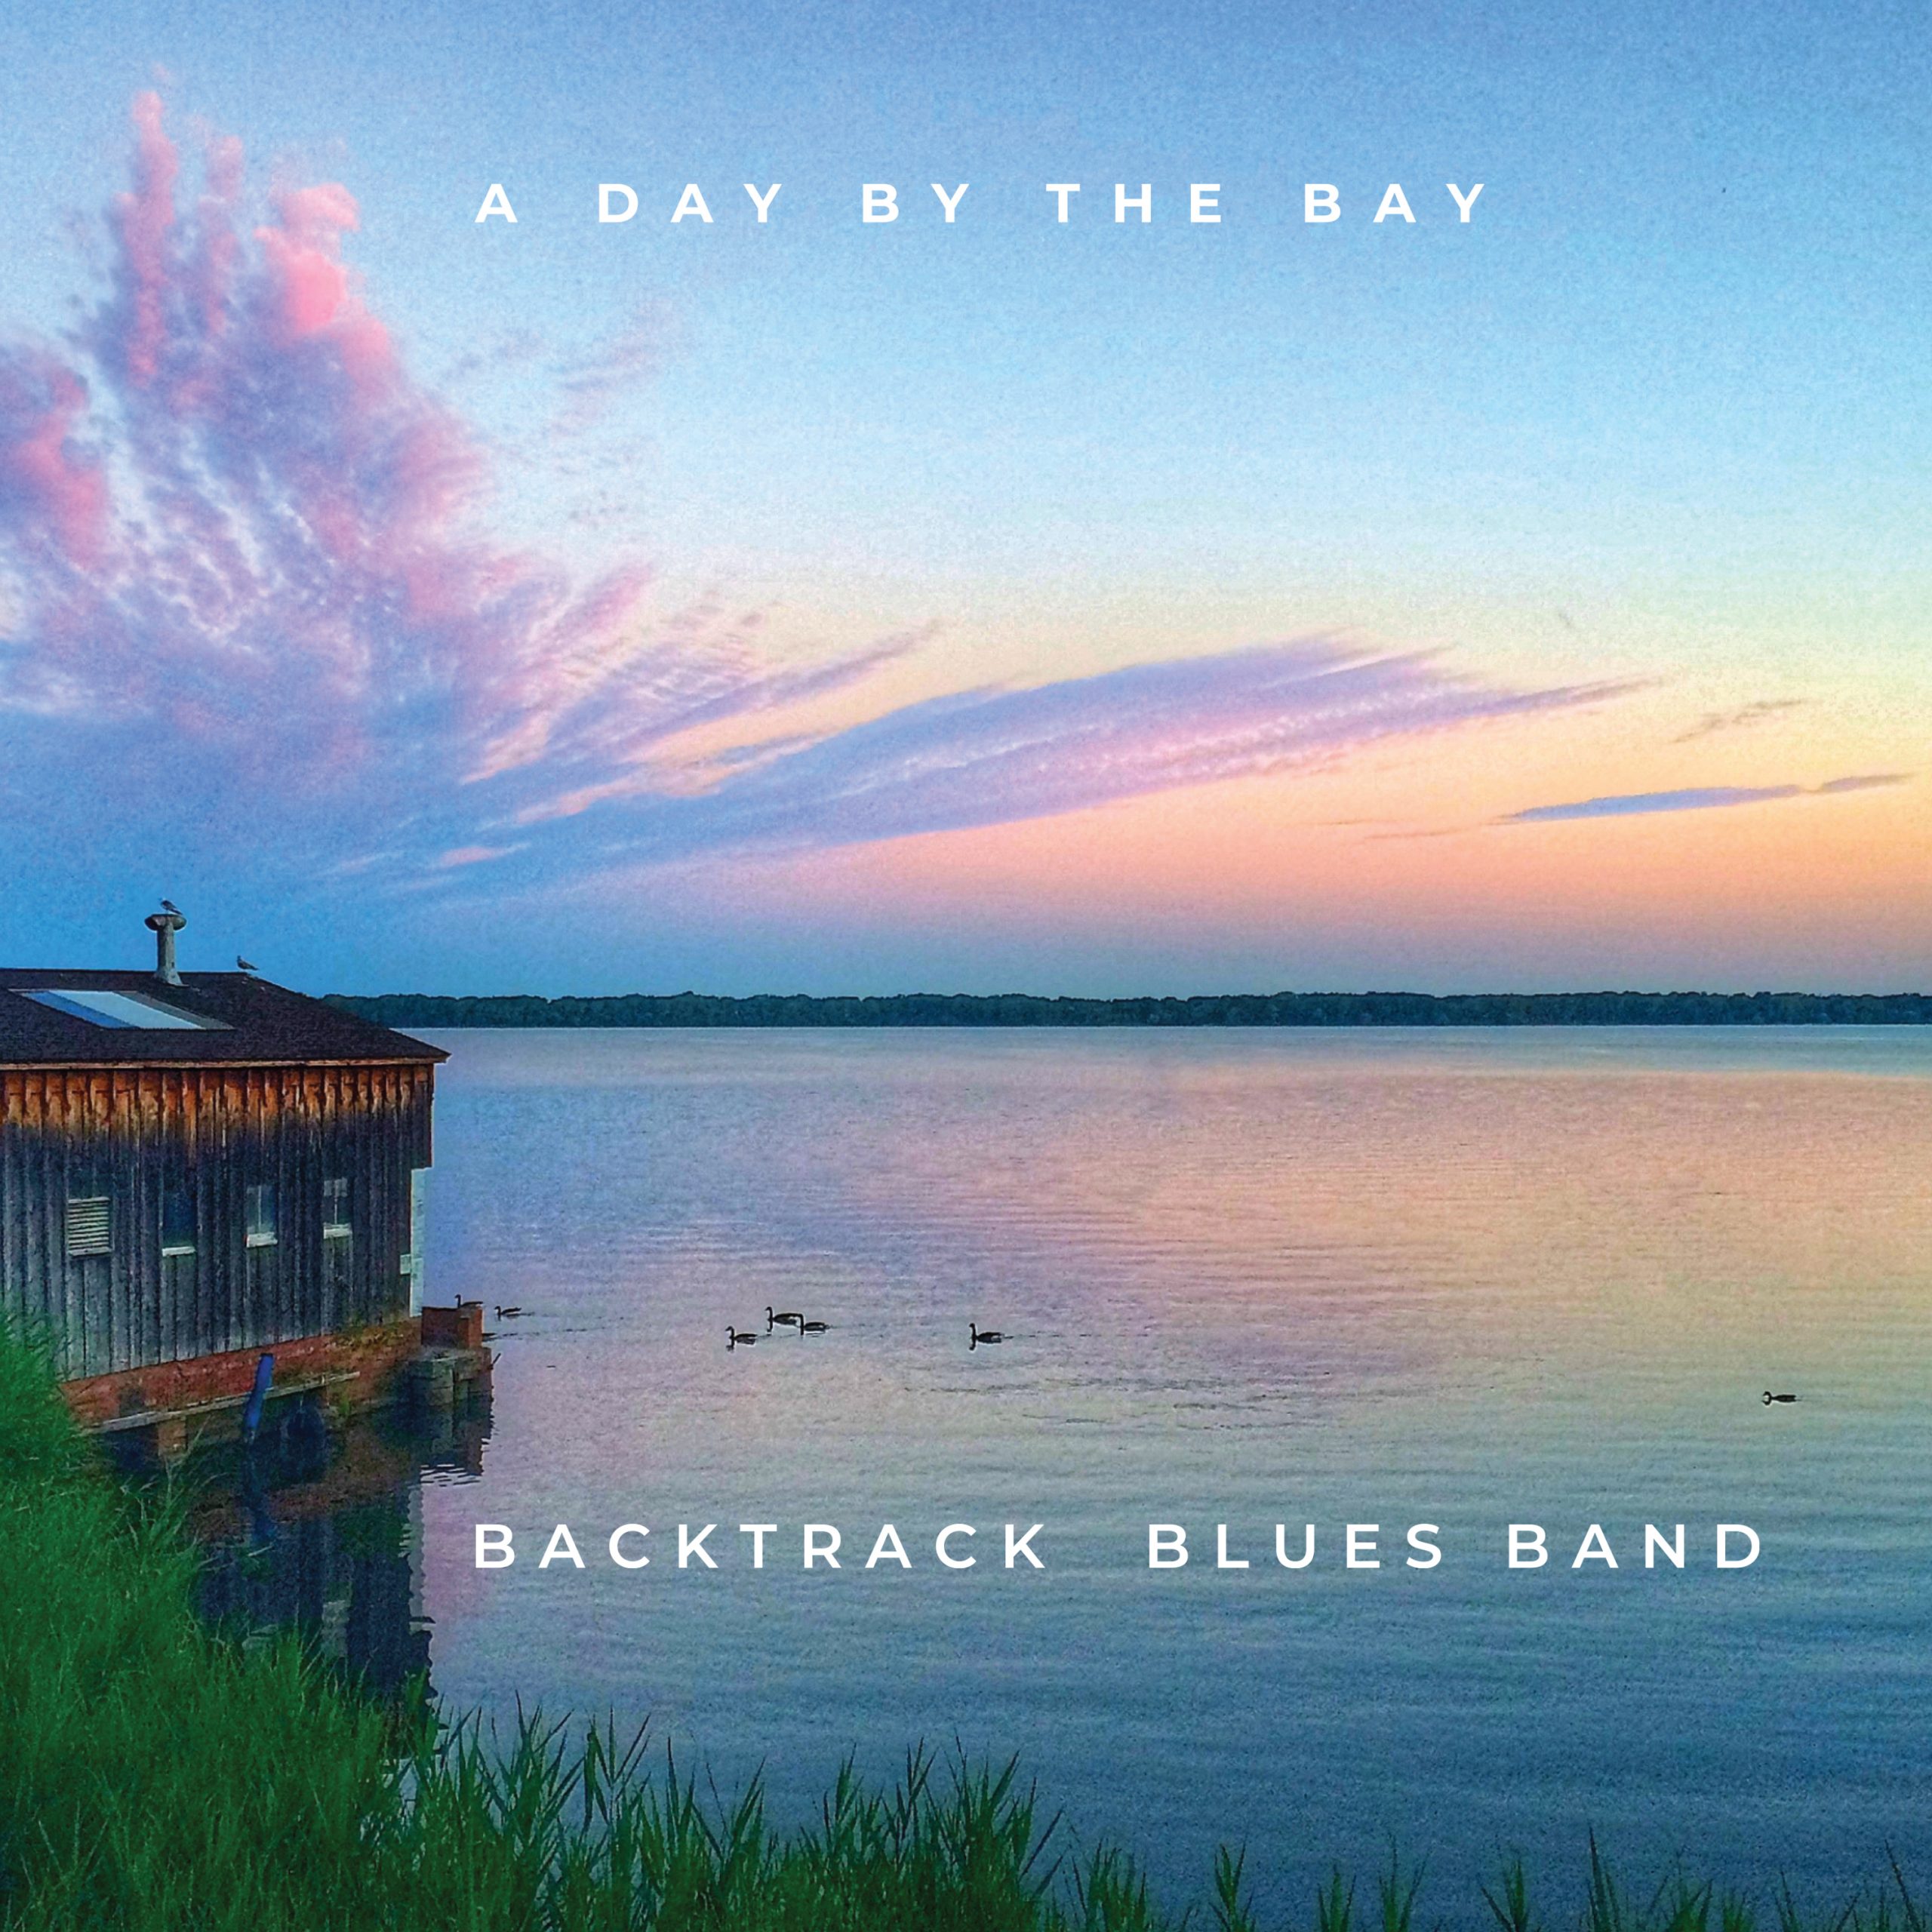  Backtrack Blues Band and will release their label debut, A Day by the Bay